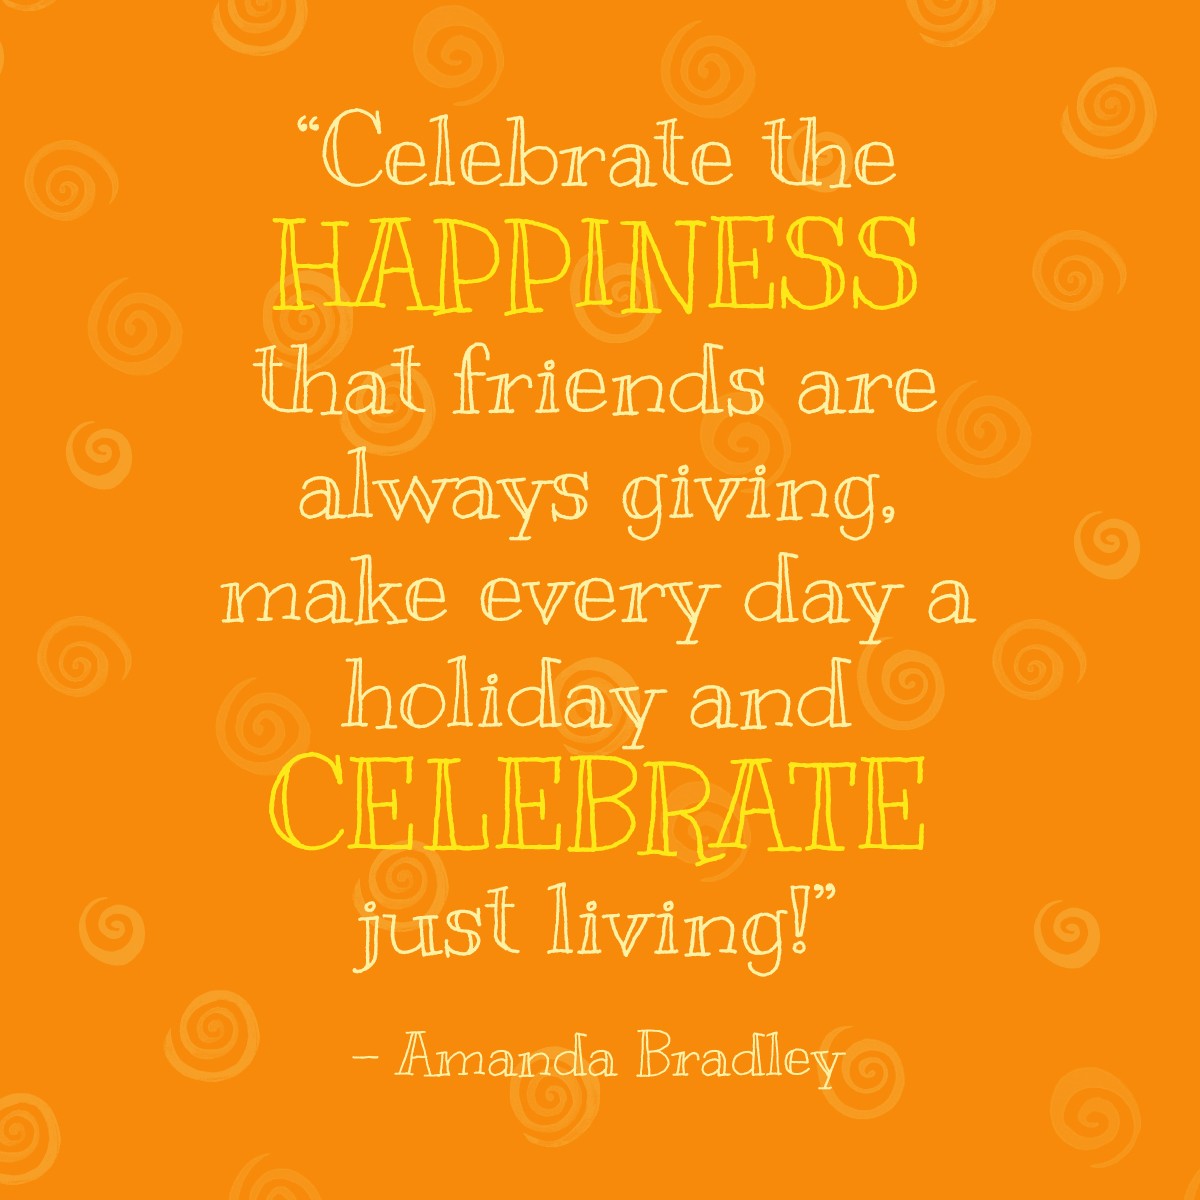 Celebrate the happiness that friends are always giving, make every day a holiday and celebrate just living! - Amanda Bradley | MakeItGrateful.com